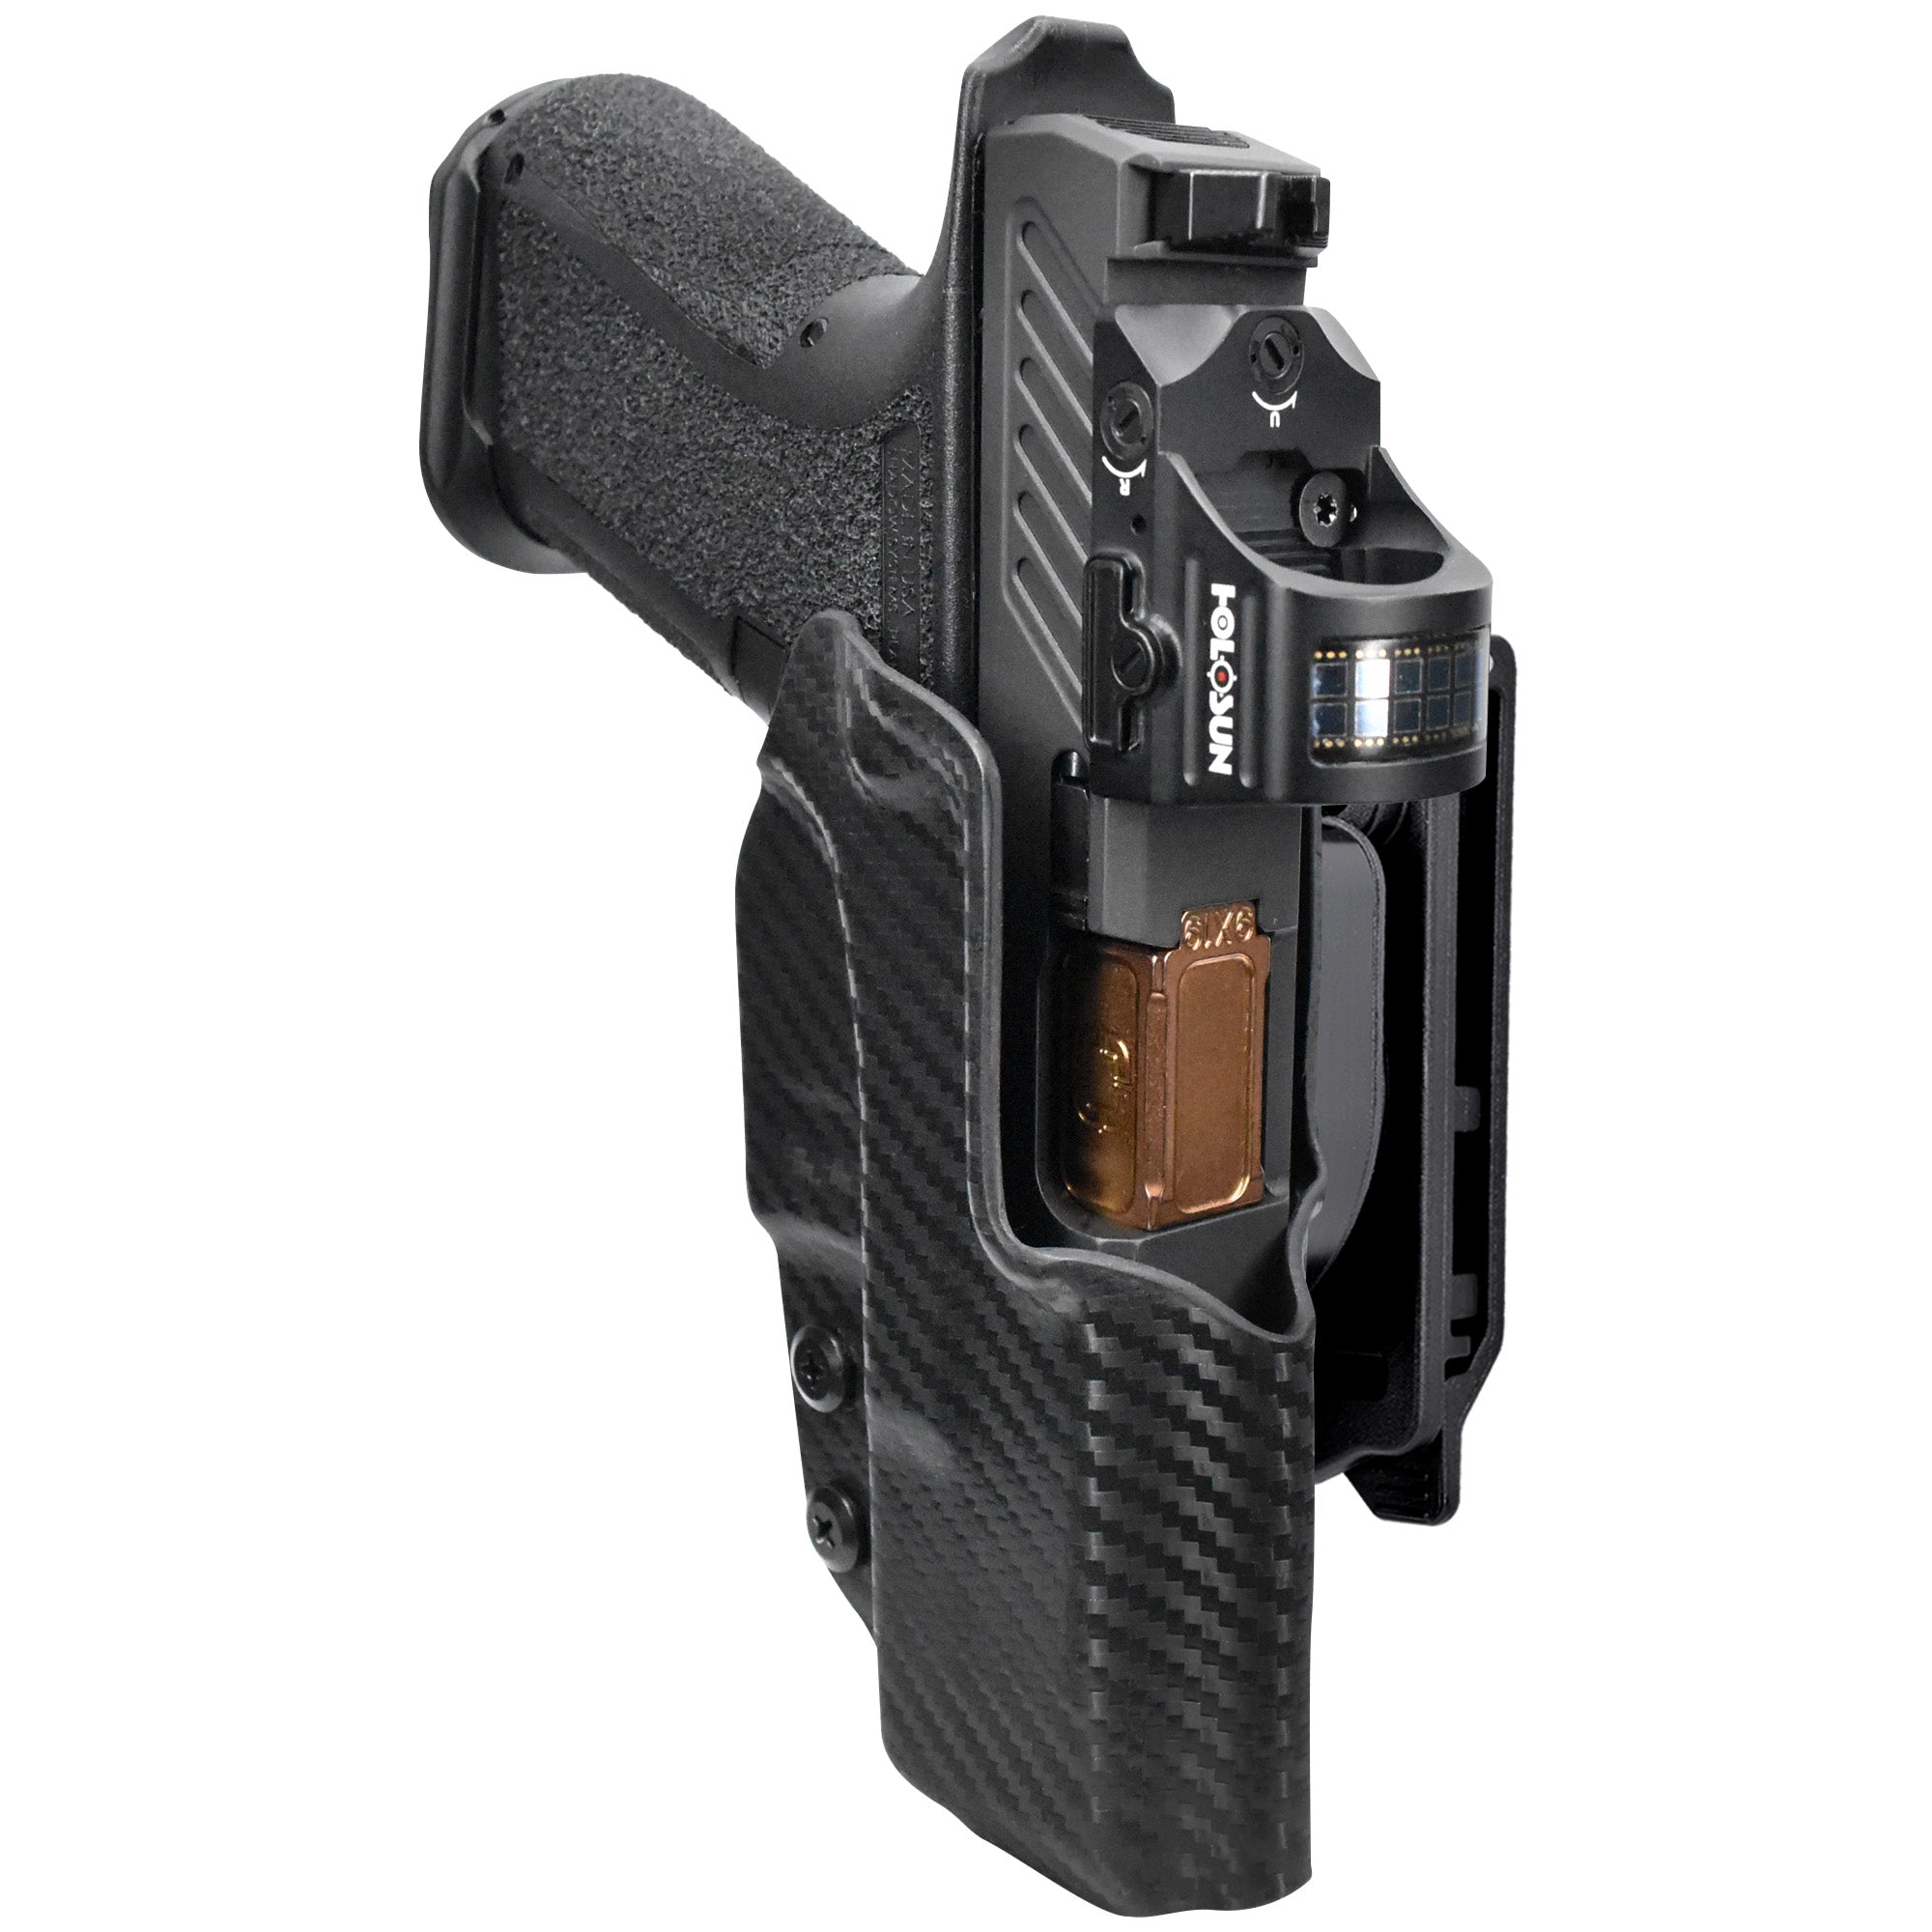 Shadow Systems MR920 Quick Release IDPA Holster in Carbon Fiber